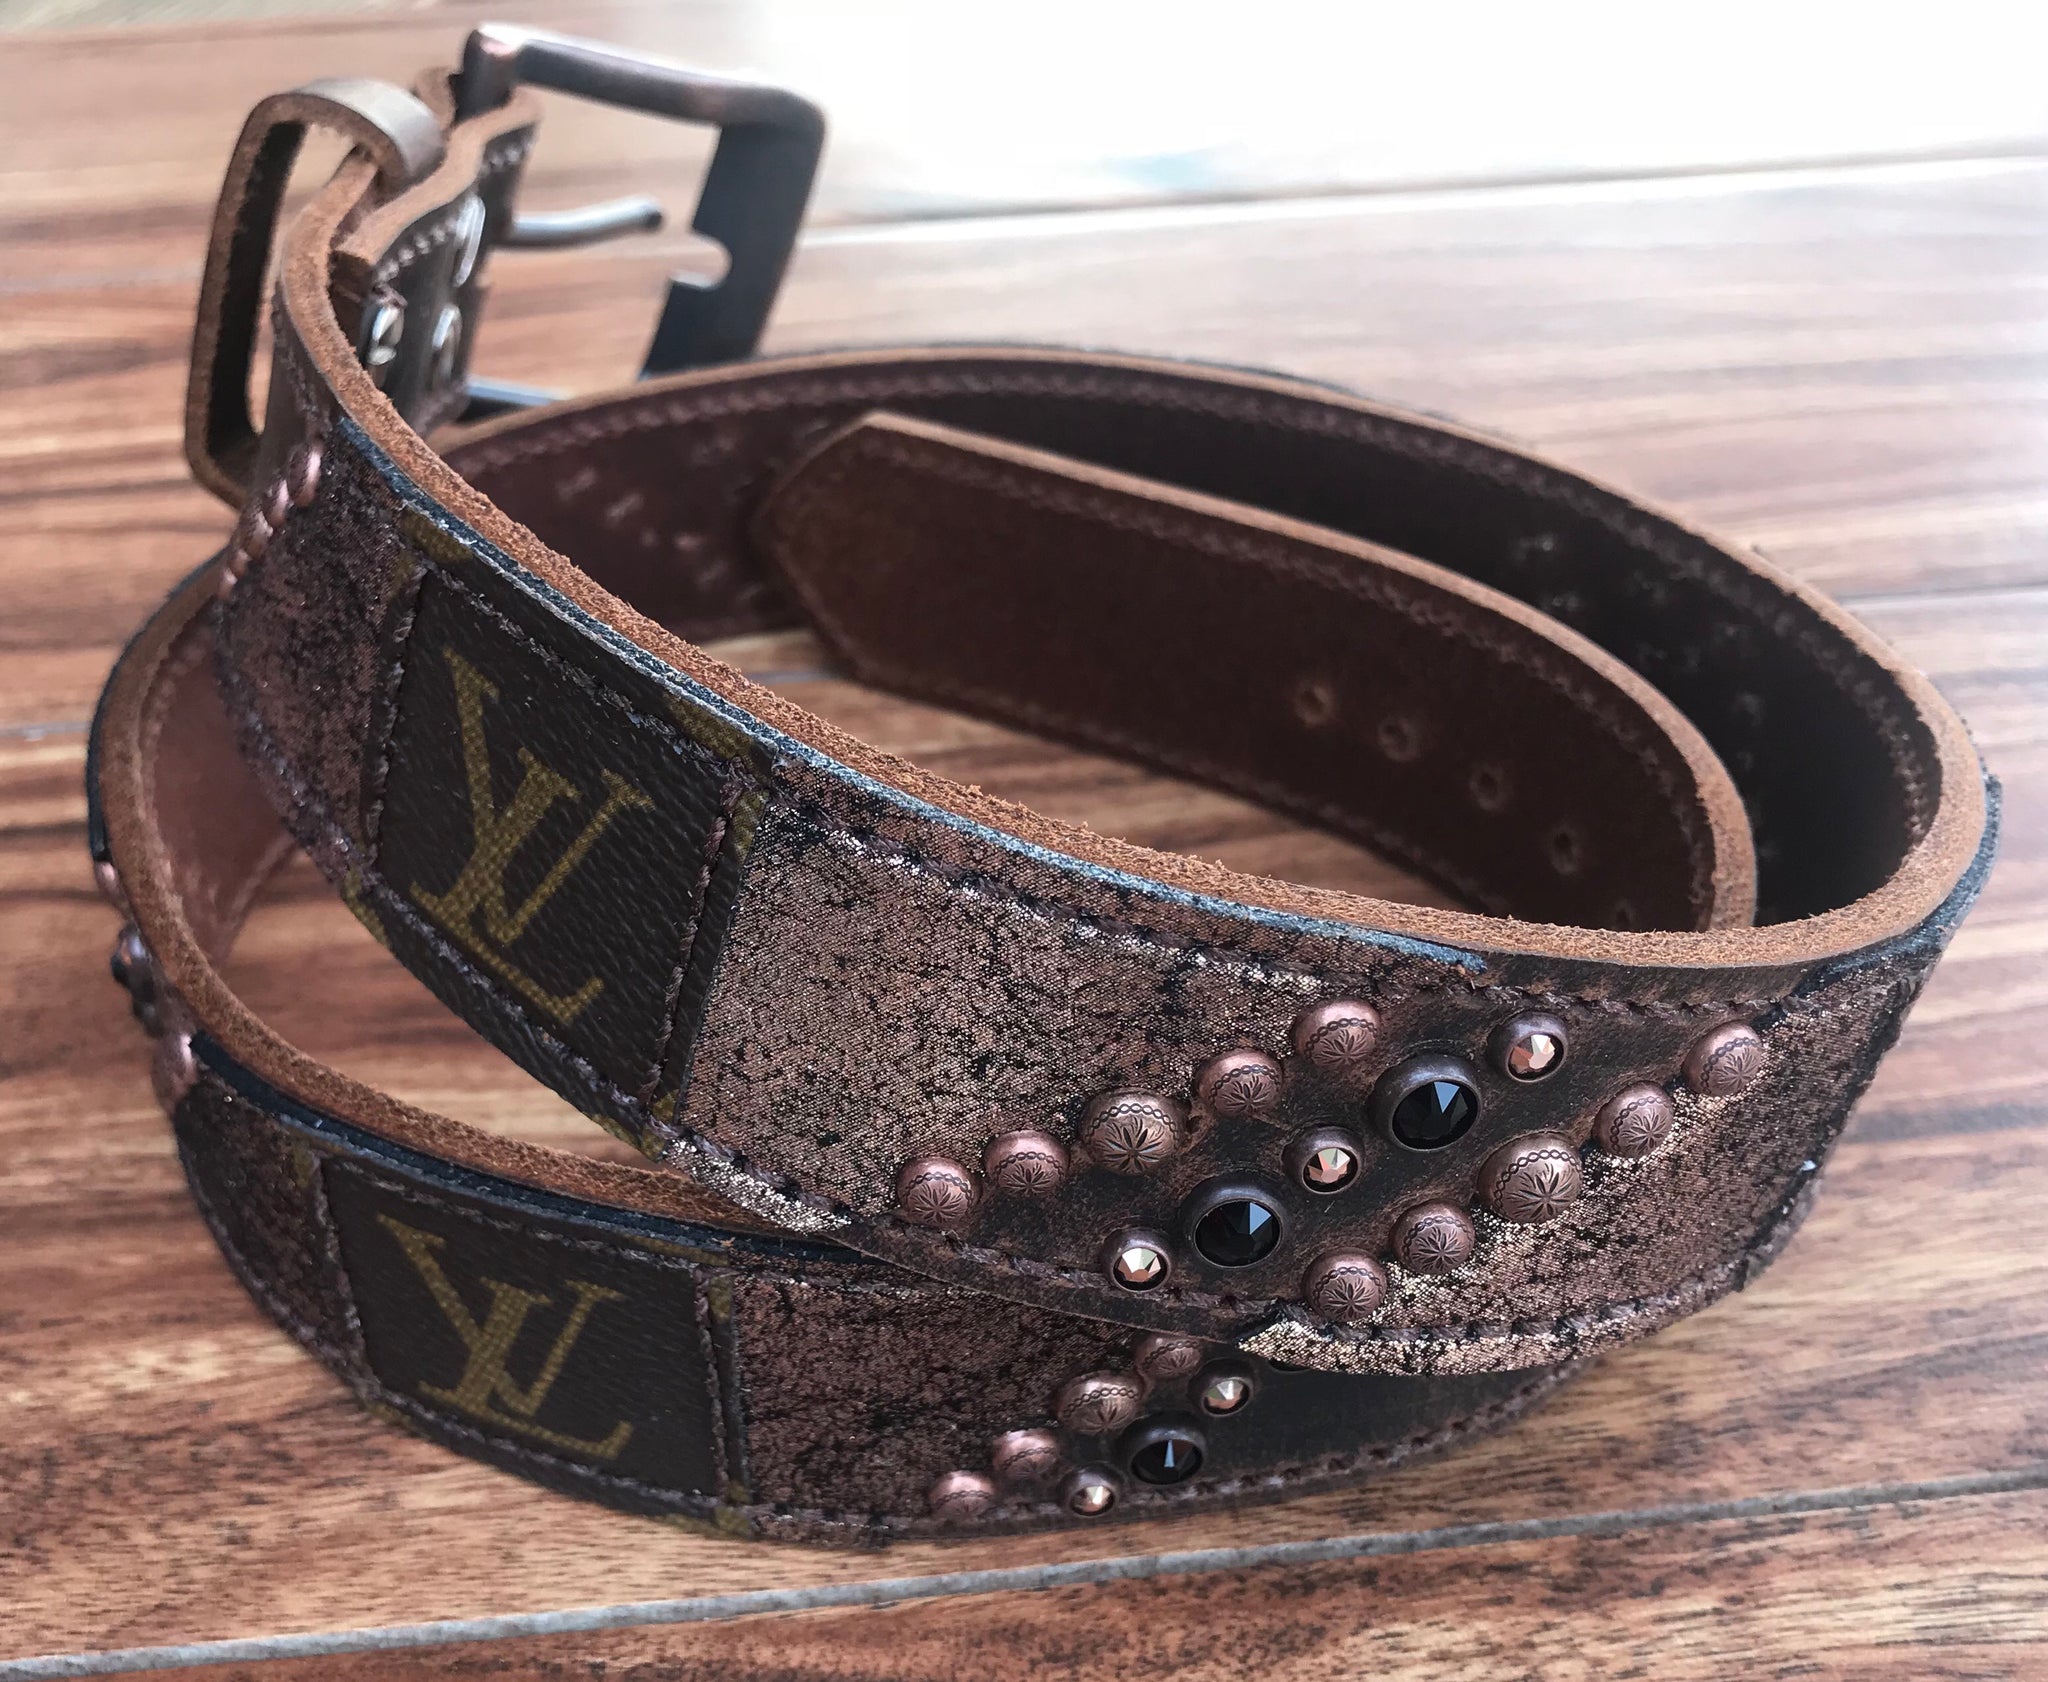 Louis Vuitton Metallic Rose Gold Leather And Coarse Glitter